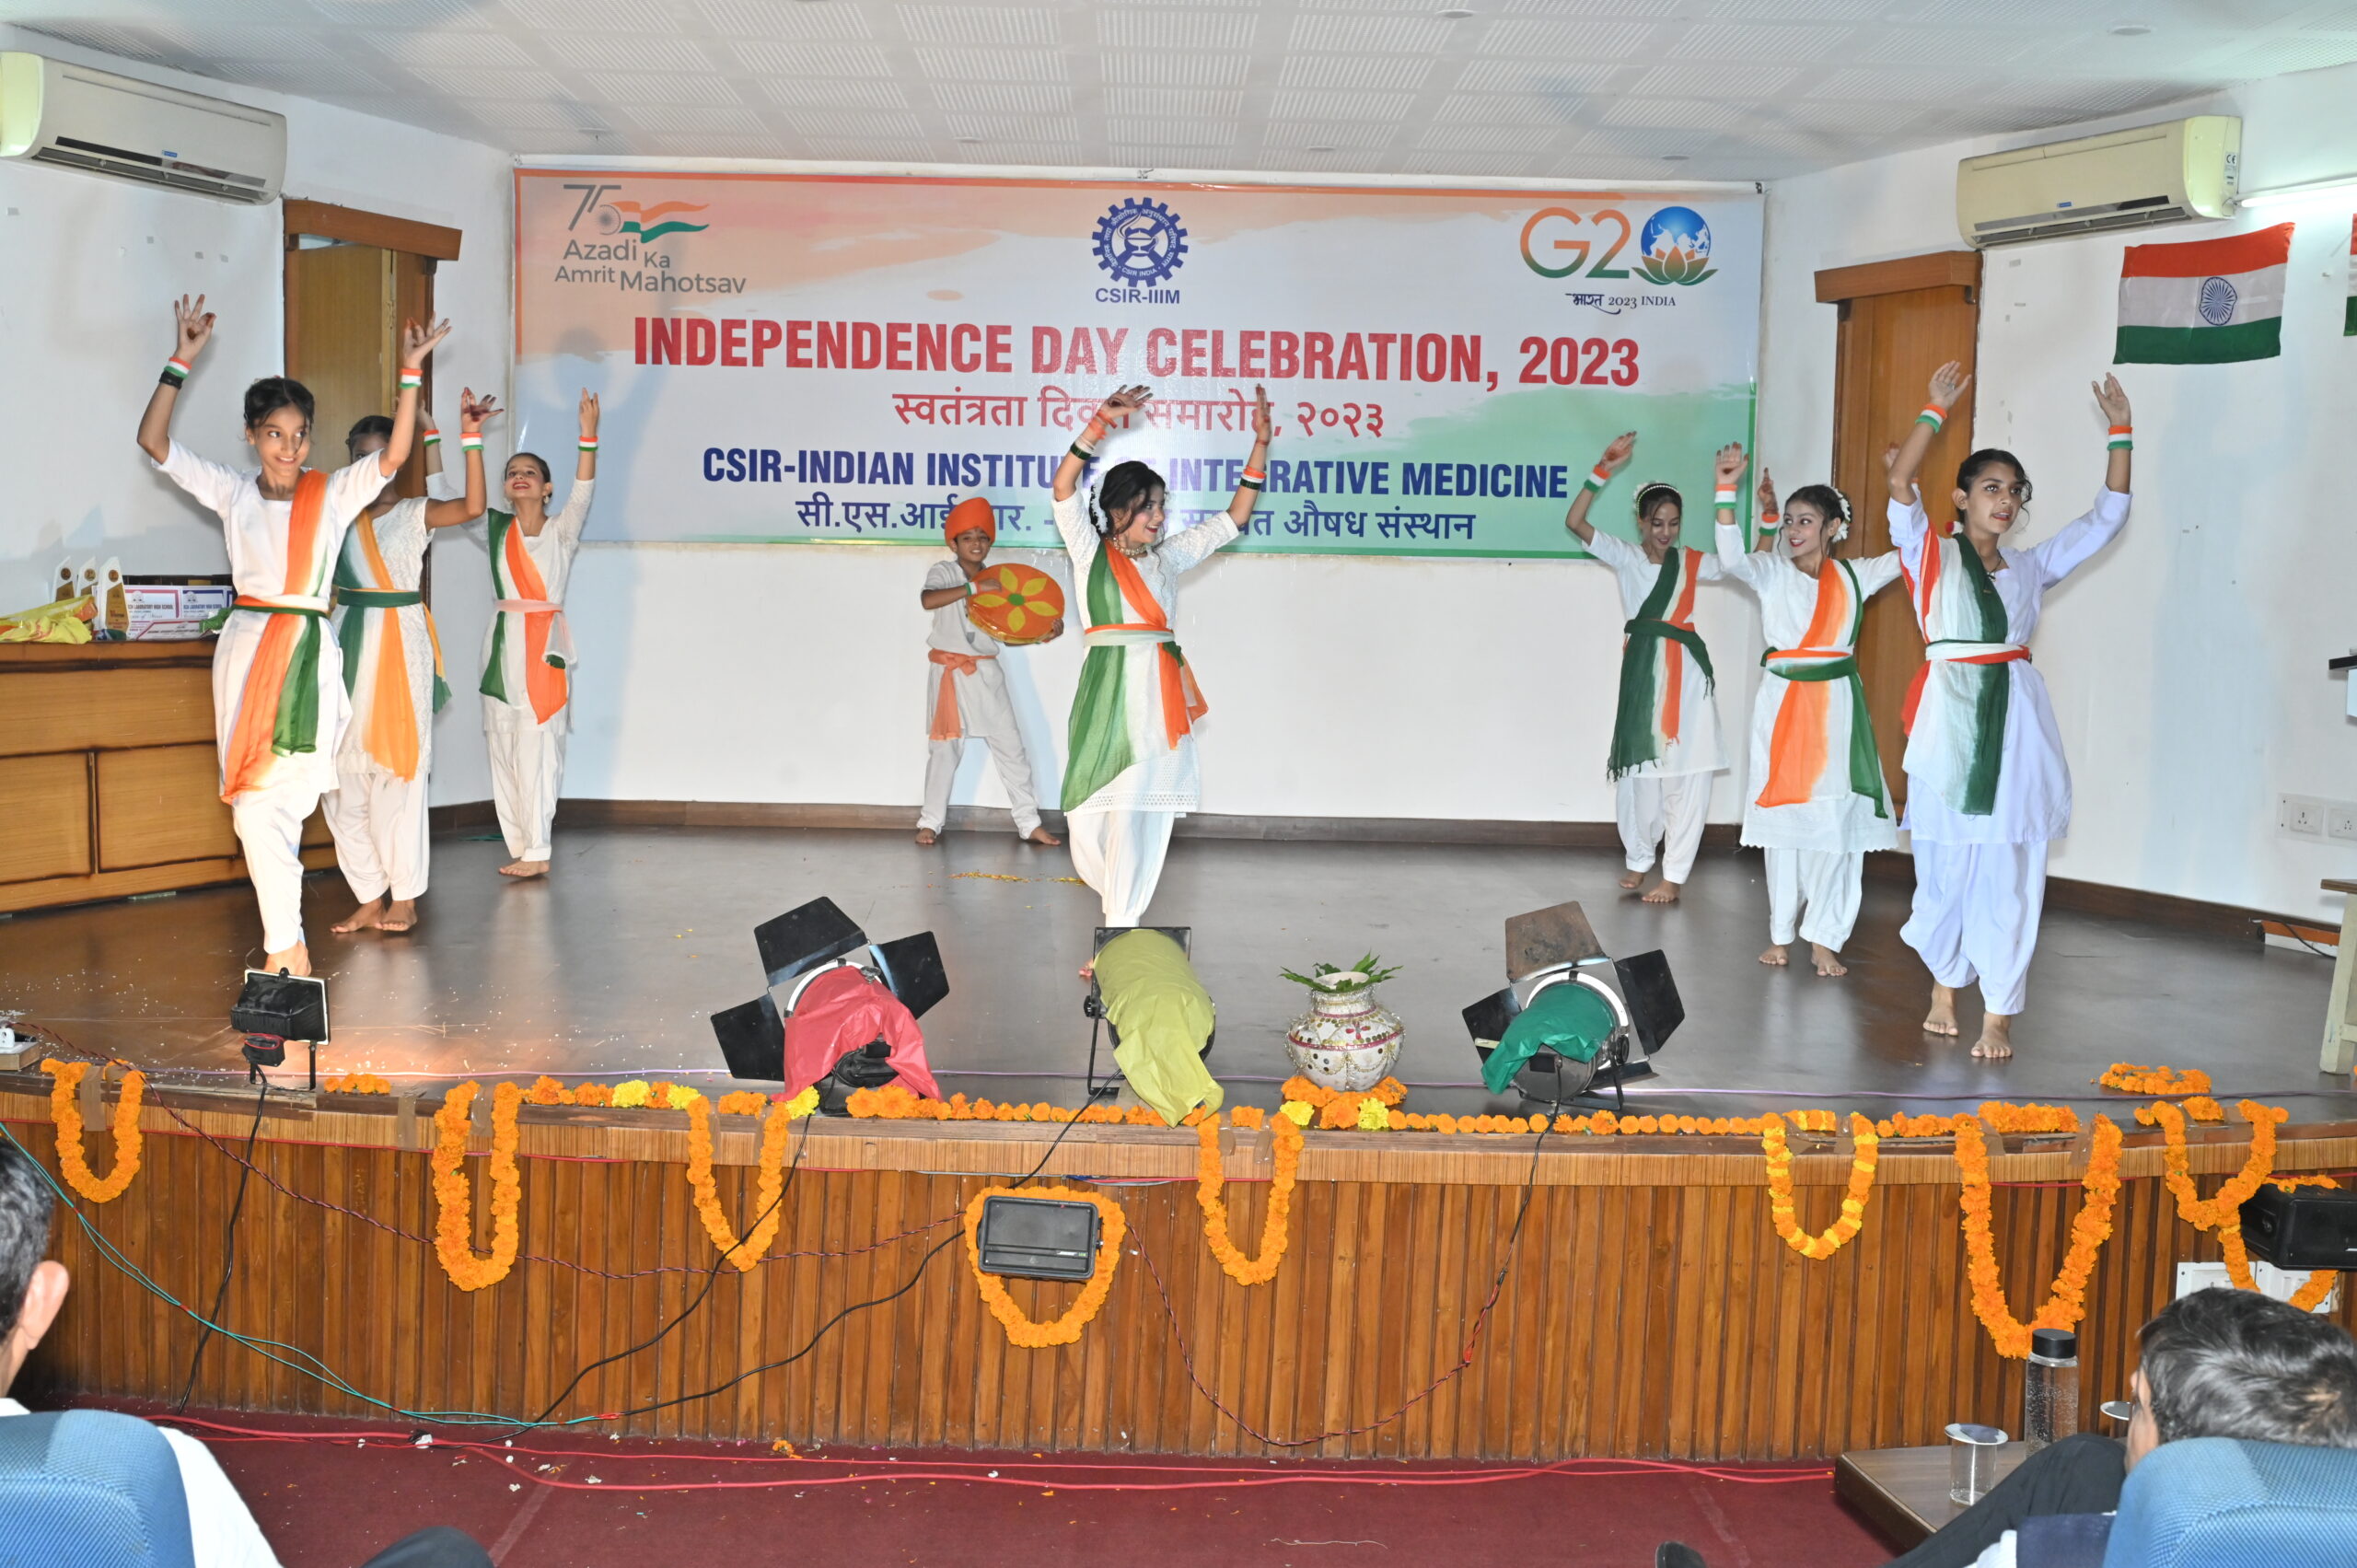 77th INDEPENDENCE DAY CELEBRATION 2023